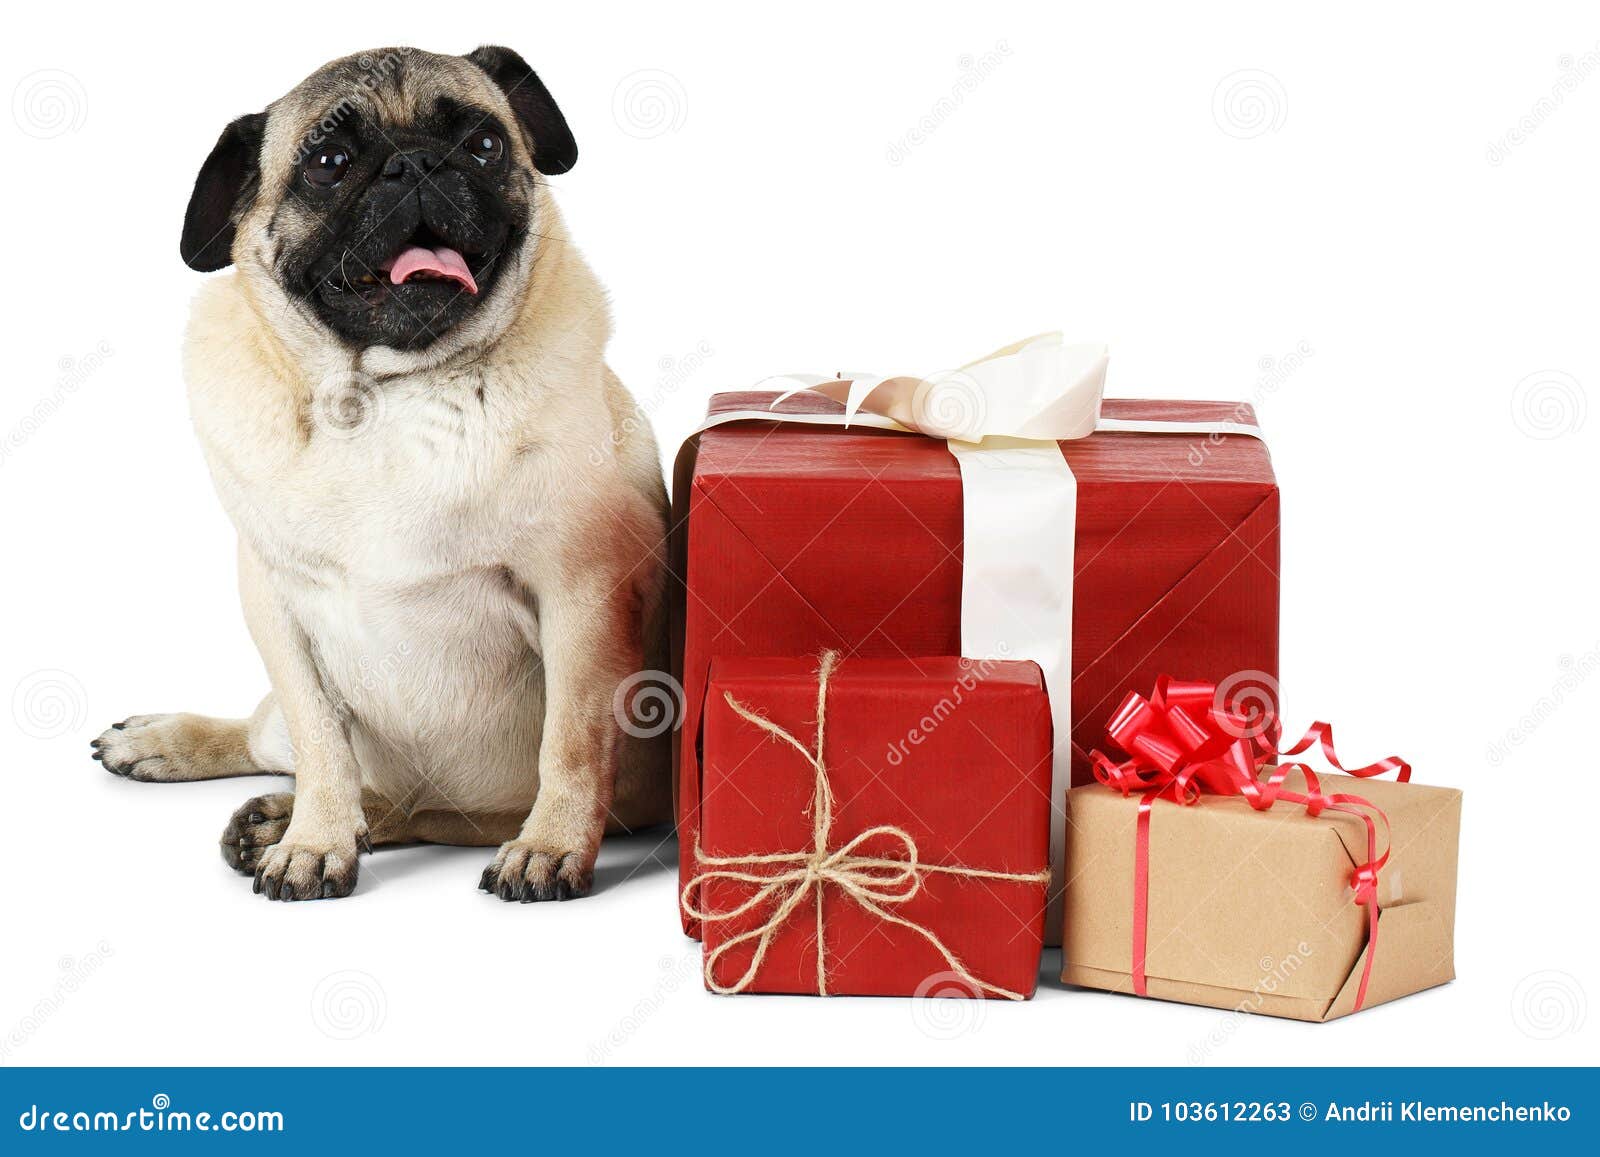 A Funny Dog, Sitting Near Gift . Isolated on White Background. Stock